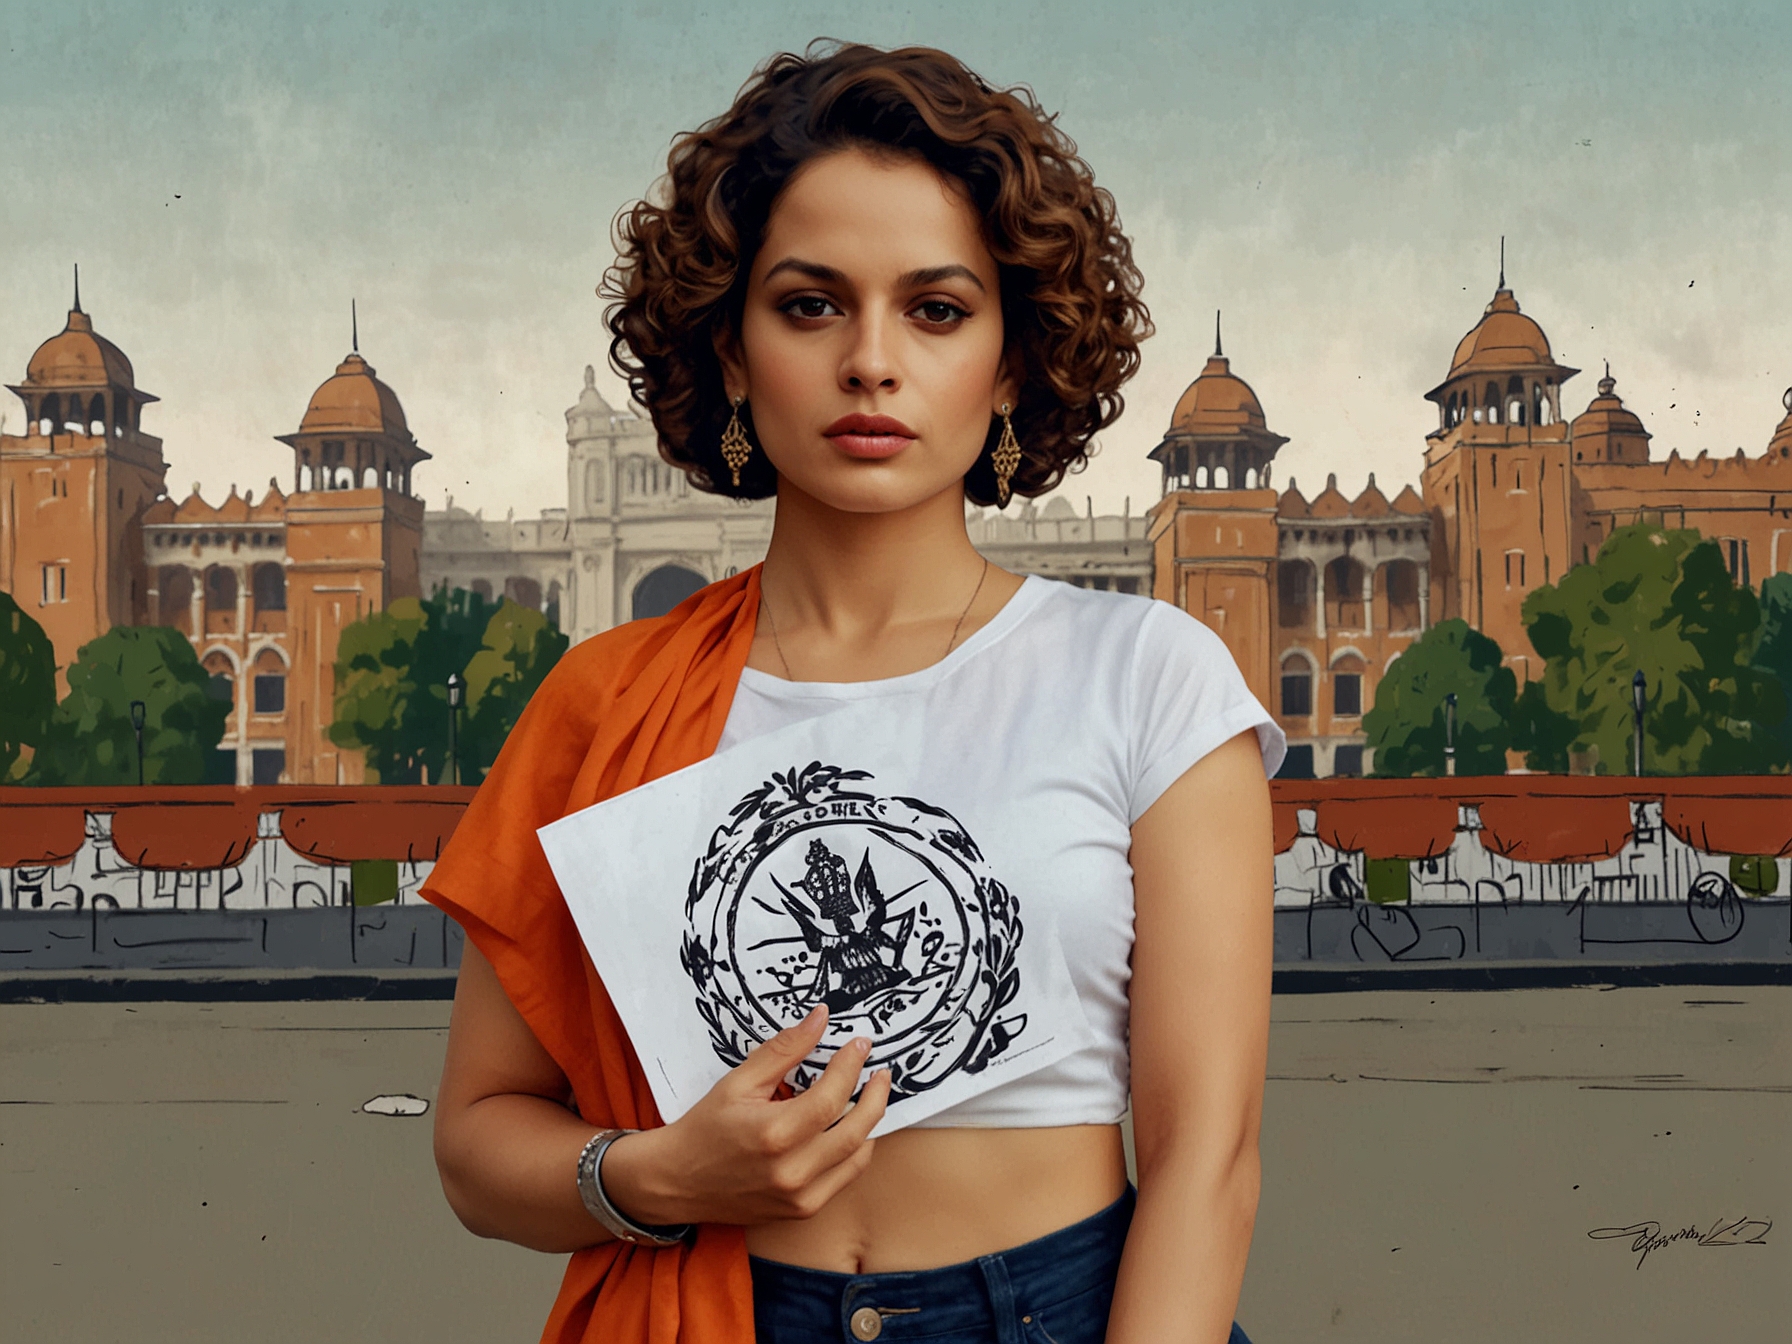 Kangana Ranaut stands outside the Parliament house promoting her film 'Emergency', holding a poster and addressing the media amidst the historic setting.